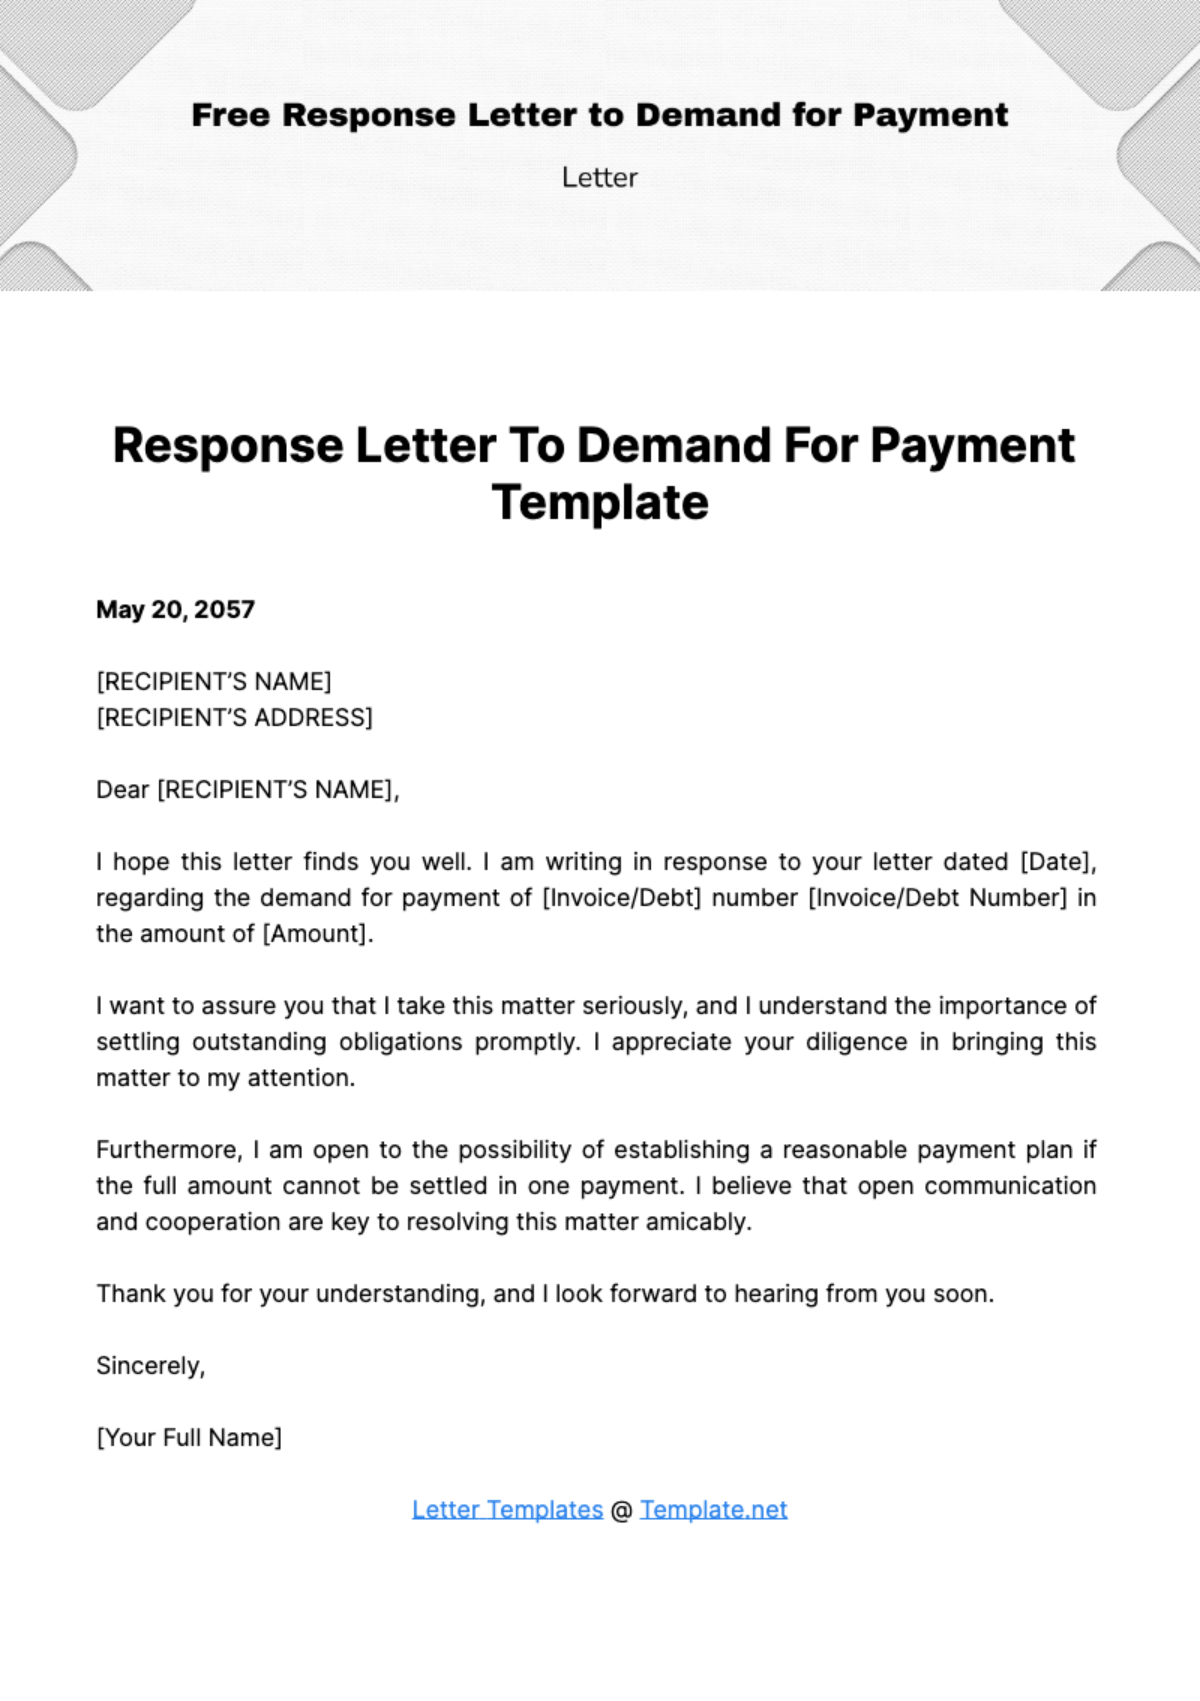 Response Letter to Demand for Payment Template